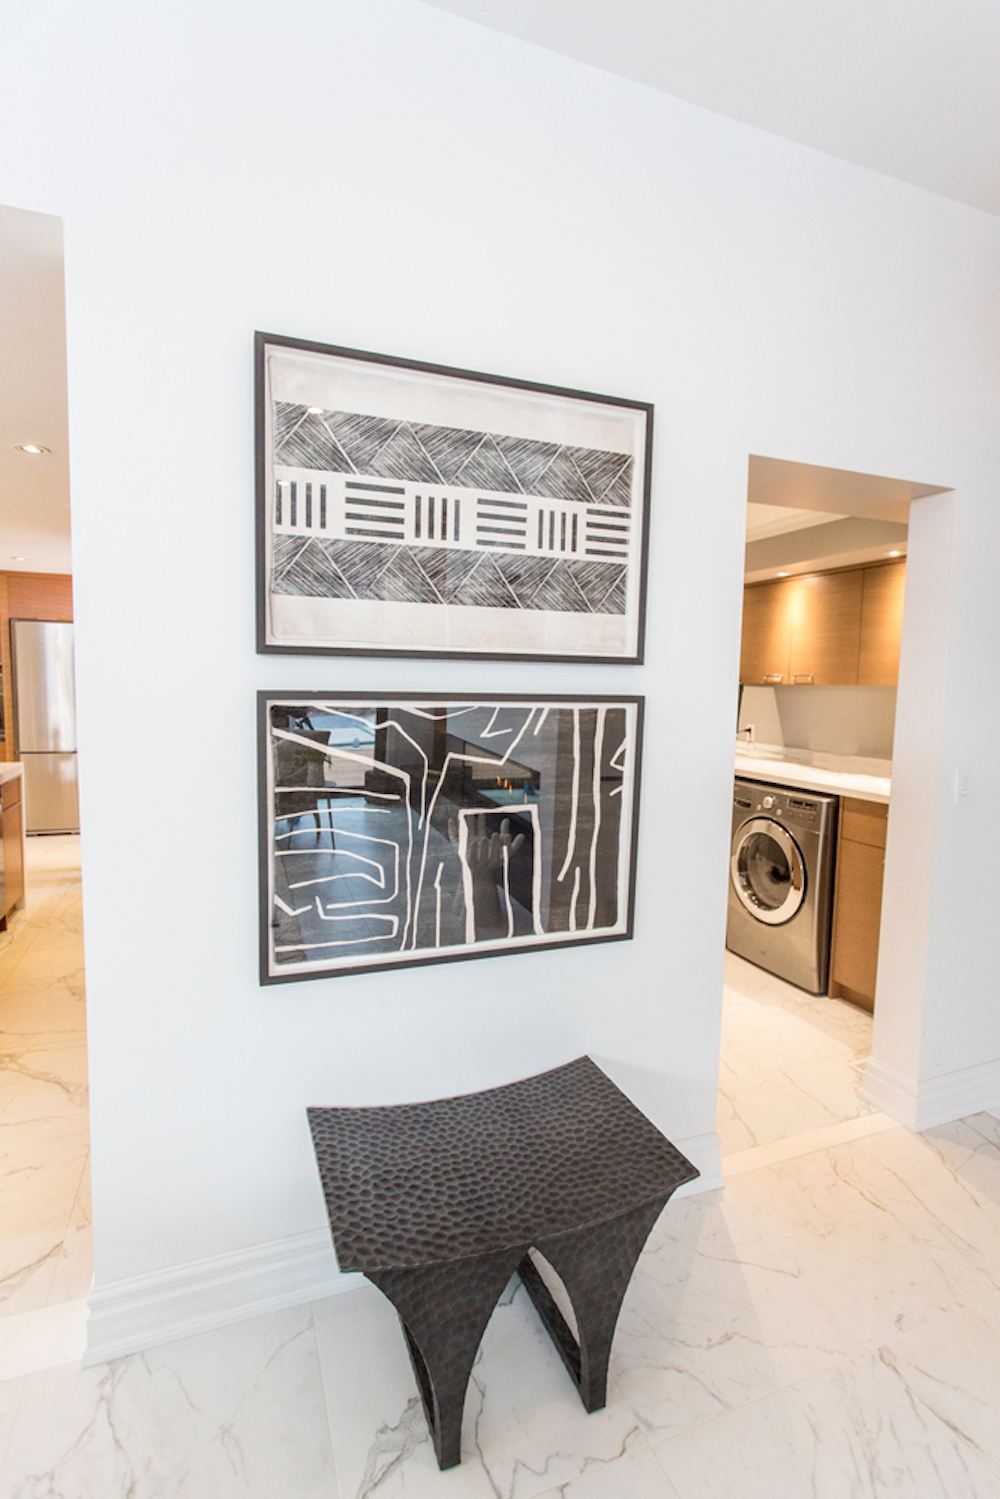 A white wall with two black and white framed pieces of art and black curved bench in a house designed by Sarah and Bryan Baeumler as featured on HGTV Canada